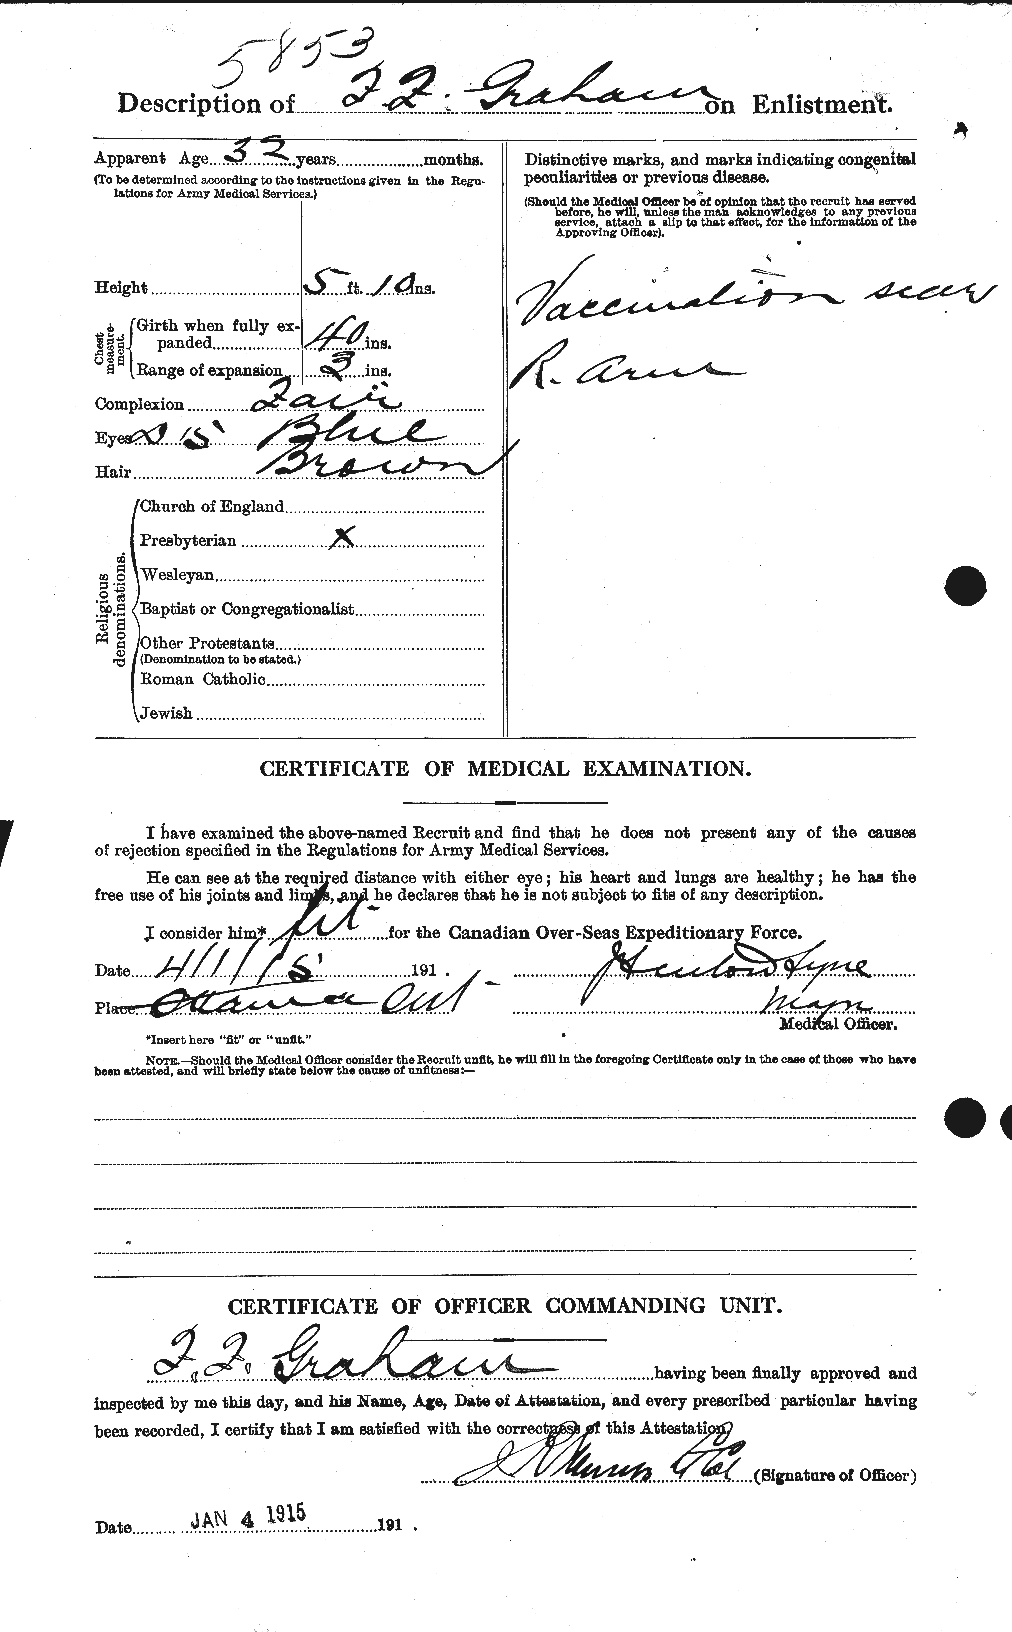 Personnel Records of the First World War - CEF 357610b